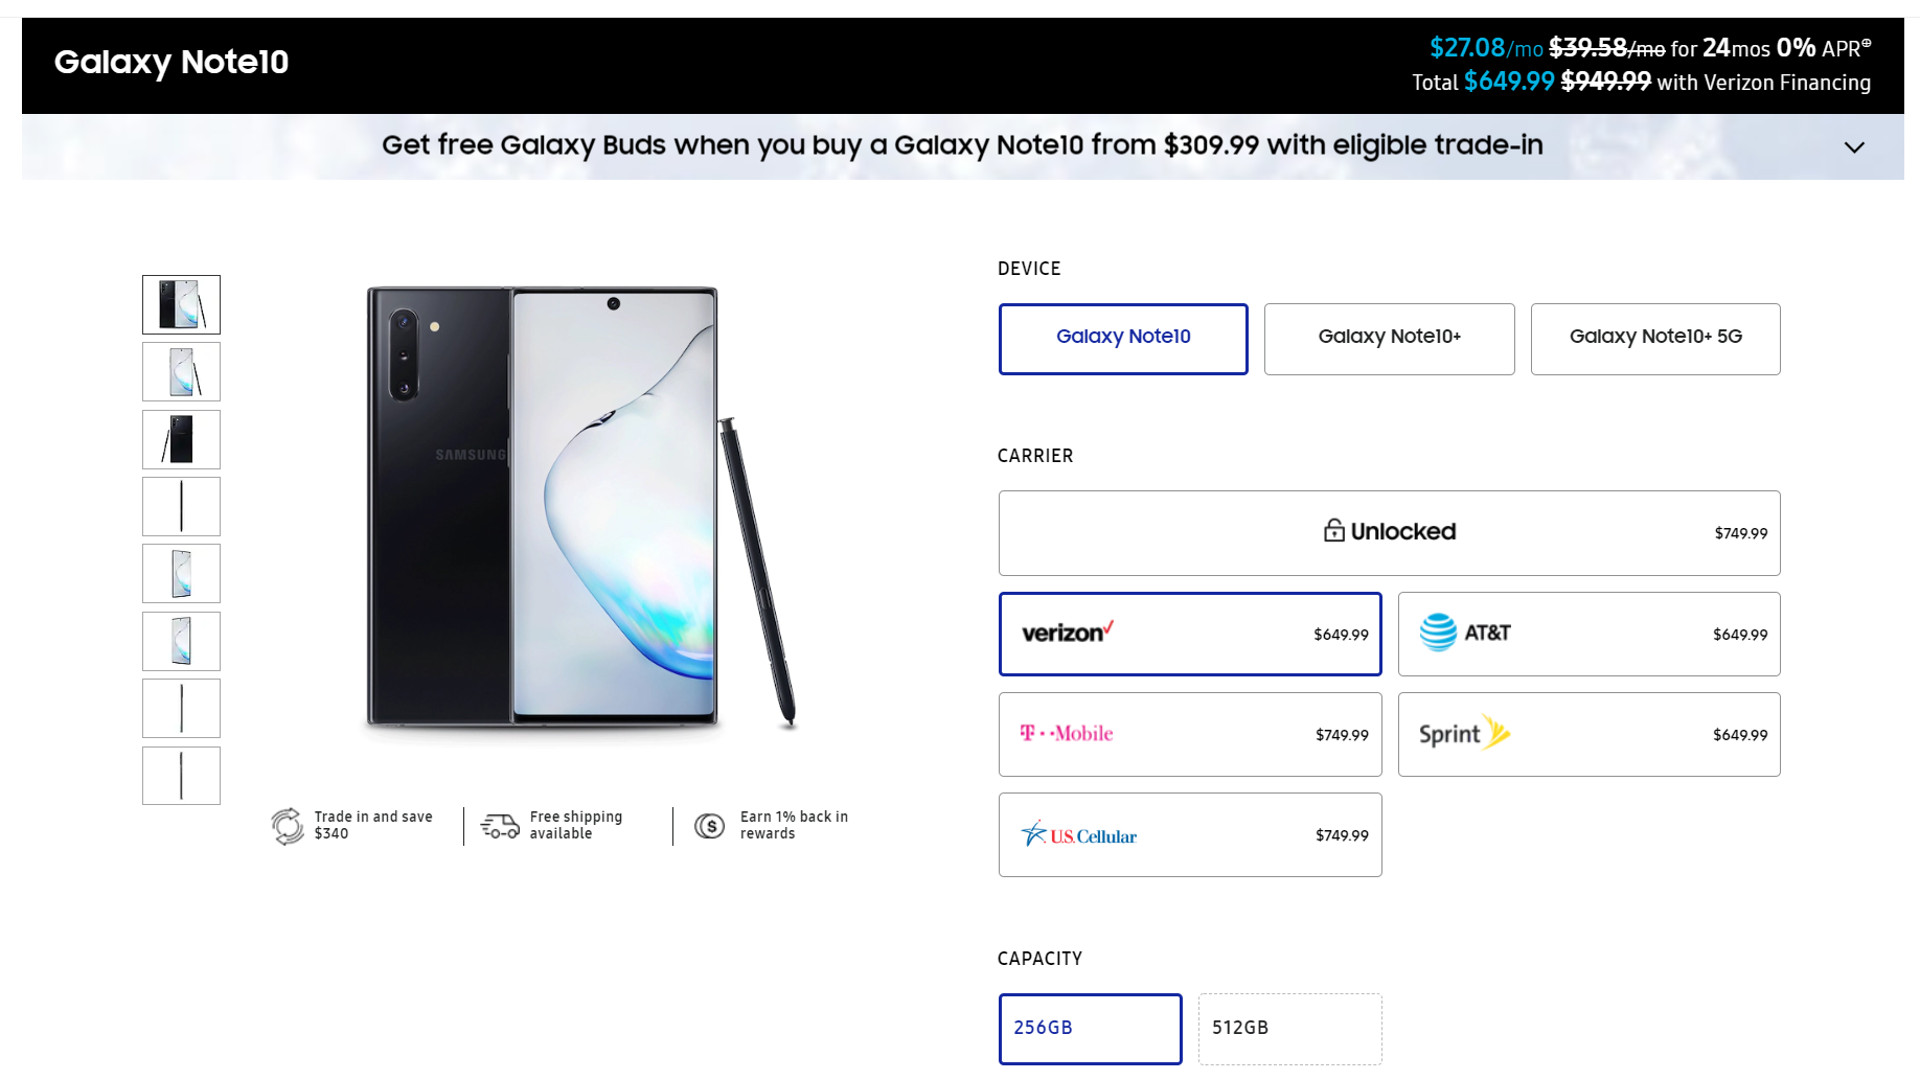 The Samsung Galaxy Note 10 deal on Samsung's website.